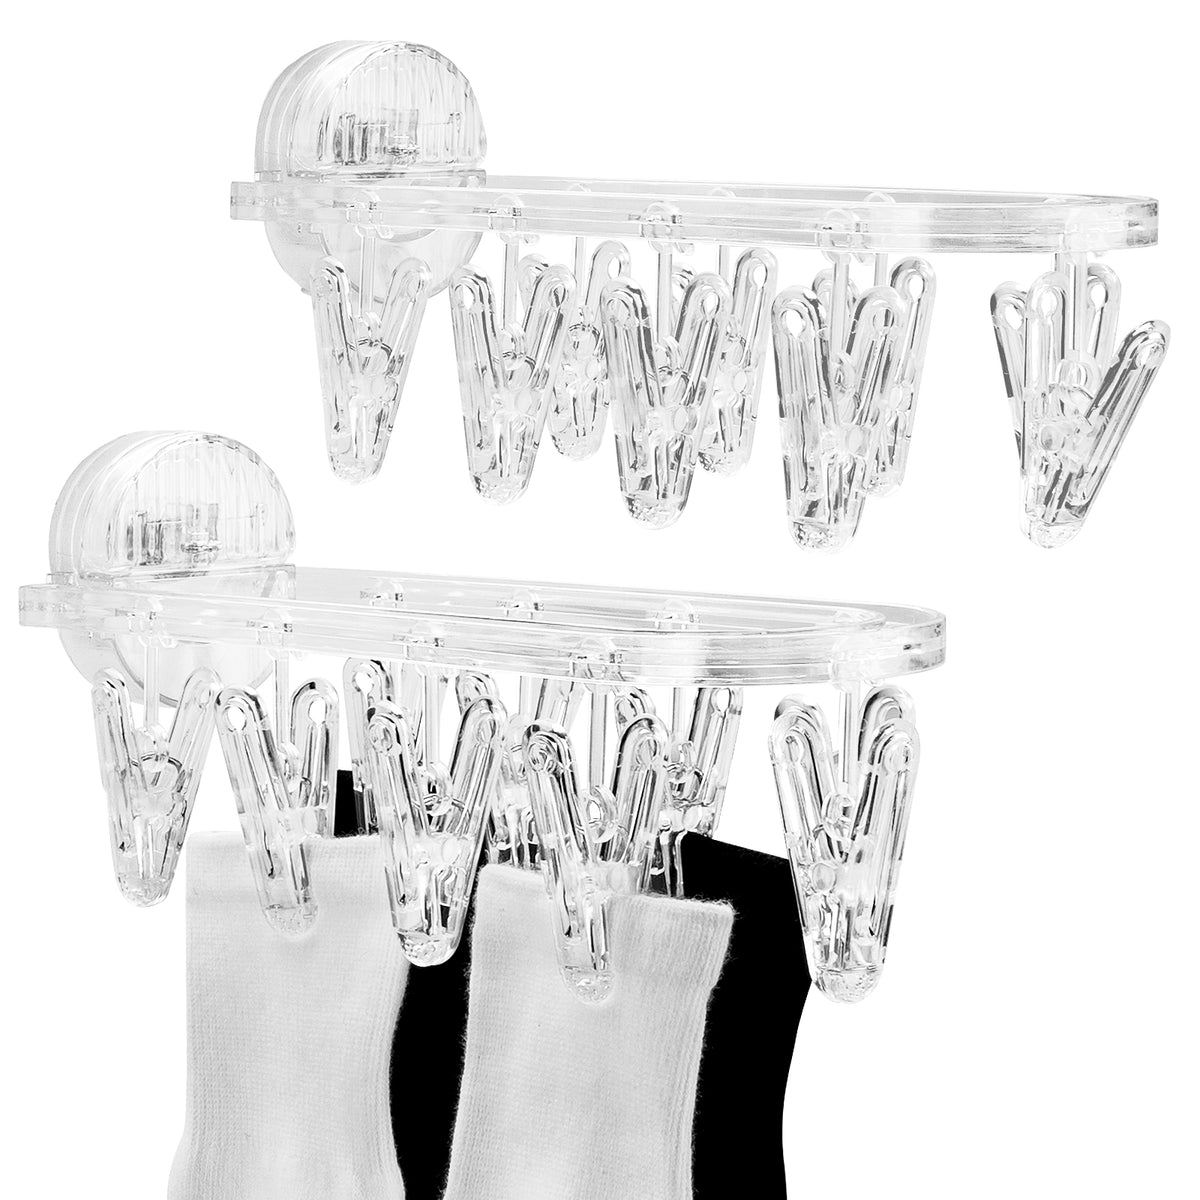 Adorila 2 Pack Clothes Drying Hanger with 9 Clips, Foldable Laundry Drying Rack with Suction Cup, Wall Mounted Hanging Drying Rack for Clothes Underwear Socks (Clear Silver)